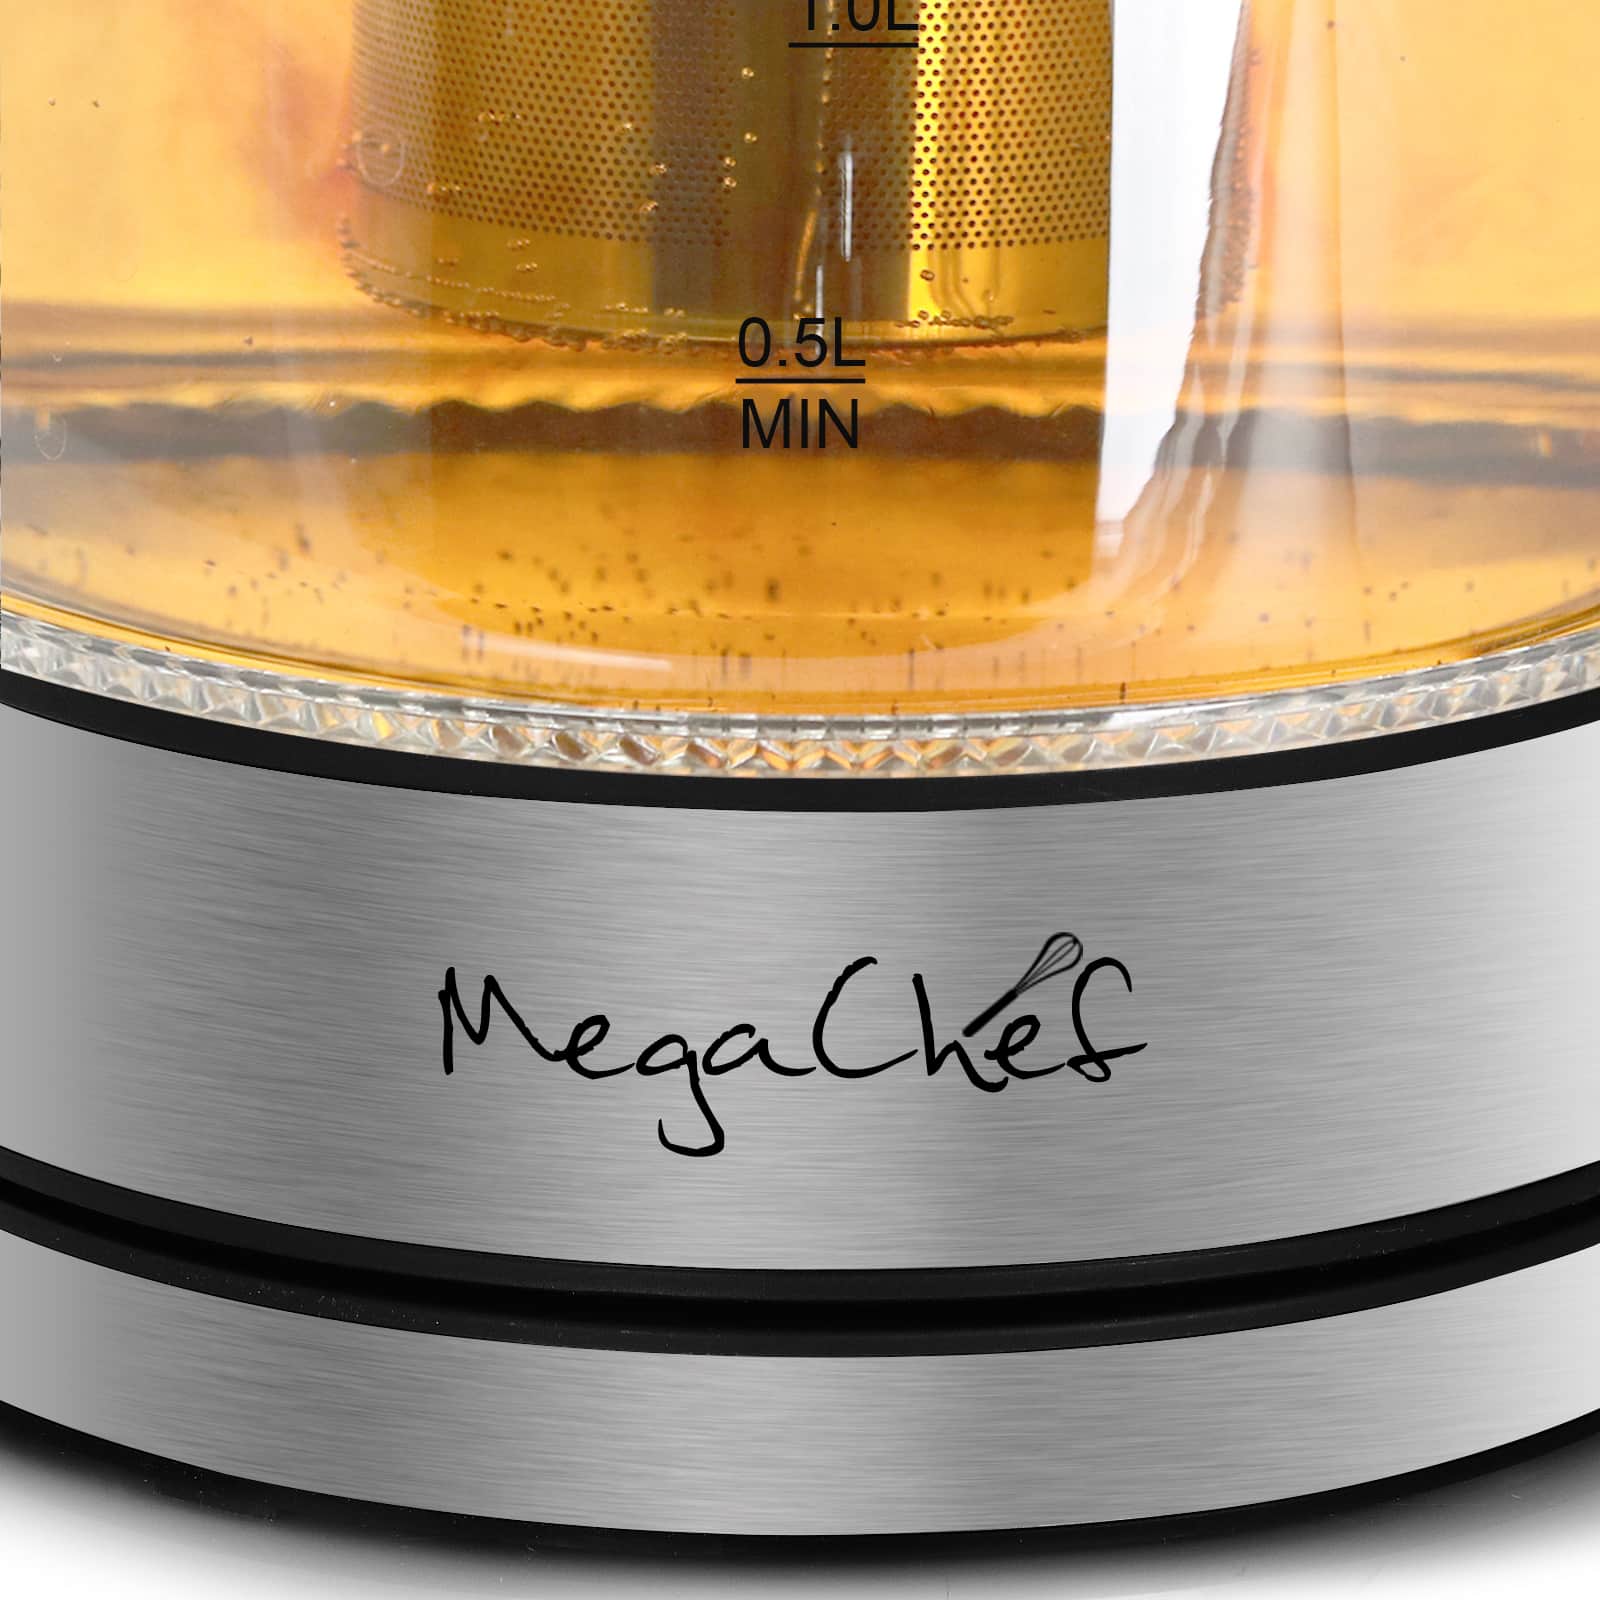 MegaChef 1.8L Glass Stainless Steel Electric Tea Kettle